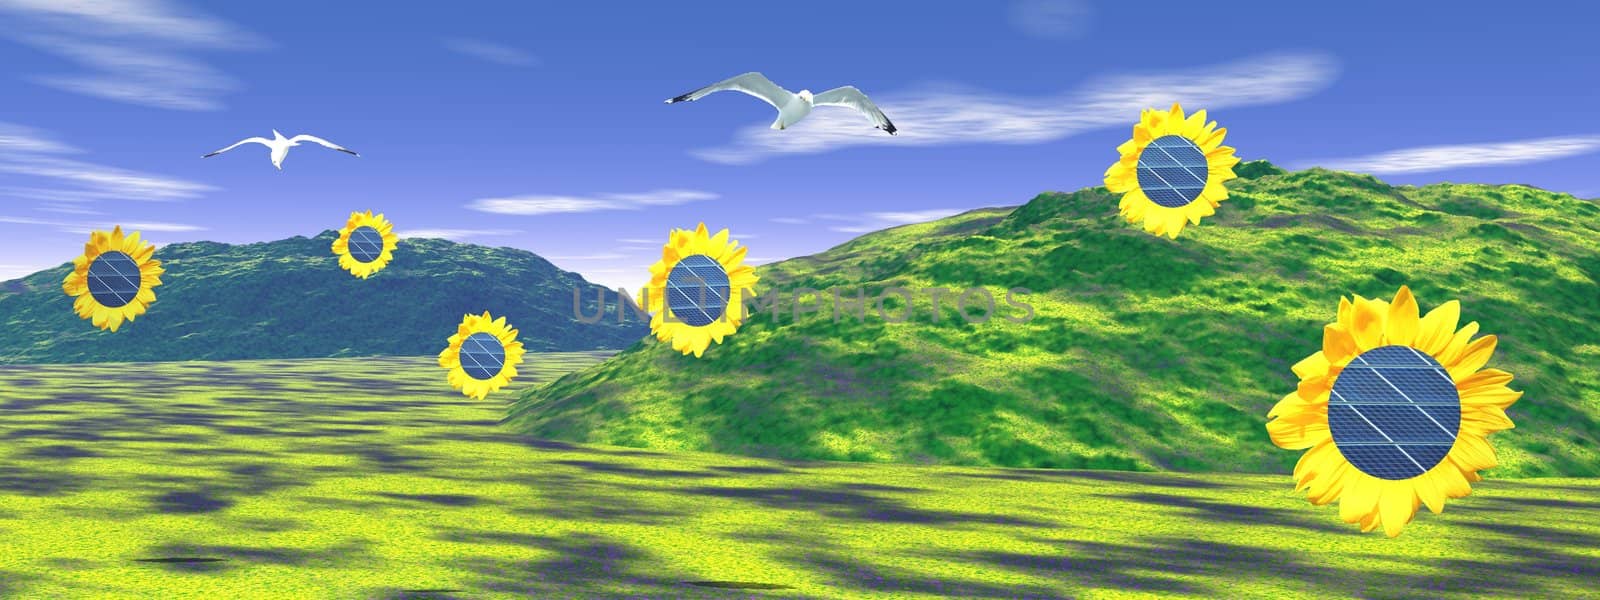 Sunflowers with solar panels inside in a beautiful green landscape with hills and birds